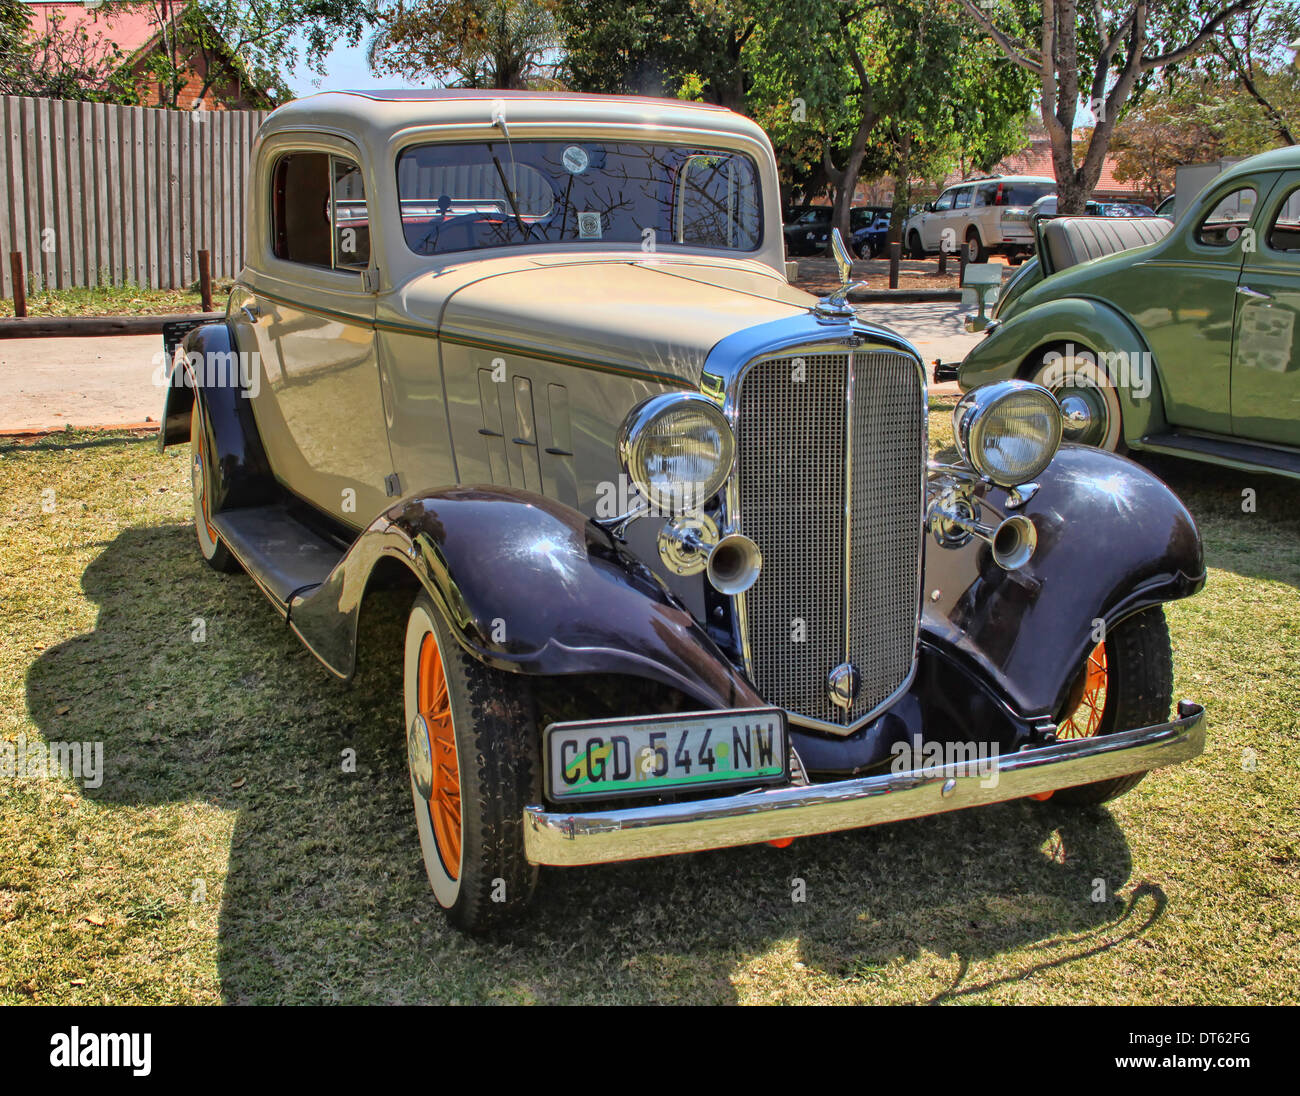 RUSTENBURG, SOUTH AFRICA - SEPTEMBER 9: A beige 1932 Chevrolet Five Window Rumble seat Coupe Stock Photo